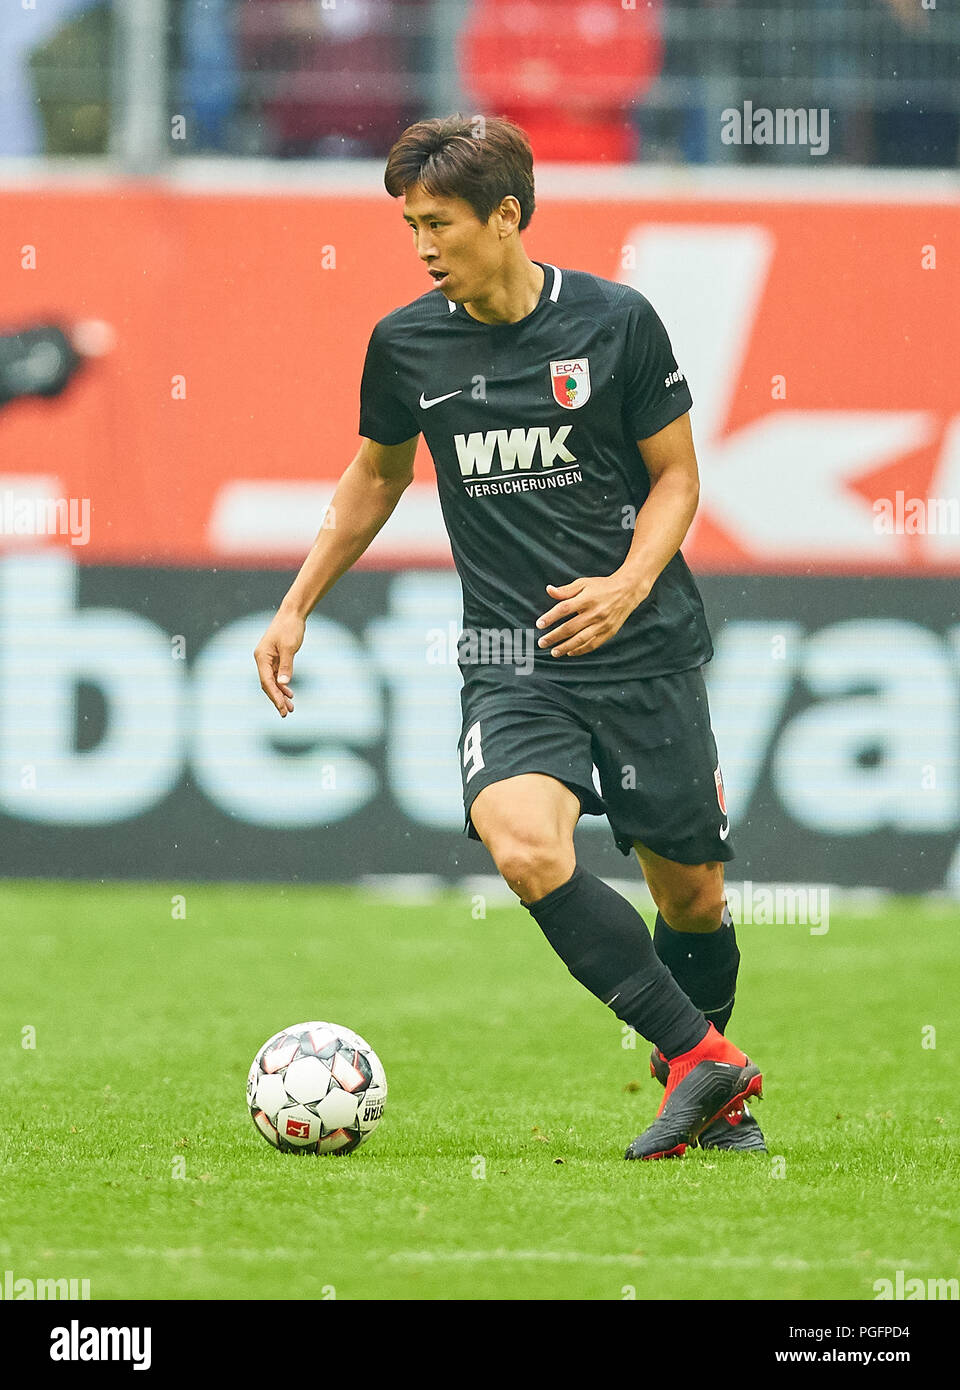 Dusseldorf, Germany. 25 August 2018. Fortuna-FCA 1-2 Soccer, Dusseldorf, August 25, 2018   Ja-Cheol KOO, FCA 19  drives, controls the ball, action, full-size, Single action with ball, full body, whole figure, cutout, single shots, ball treatment, pick-up, header, cut out,  FORTUNA DUSSELDORF - FC AUGSBURG 1-2  - DFL REGULATIONS PROHIBIT ANY USE OF PHOTOGRAPHS as IMAGE SEQUENCES and/or QUASI-VIDEO -  1.German Football League , Duesseldorf, August 25, 2018,  Season 2018/2019, matchday 1 © Peter Schatz / Alamy Live News Stock Photo